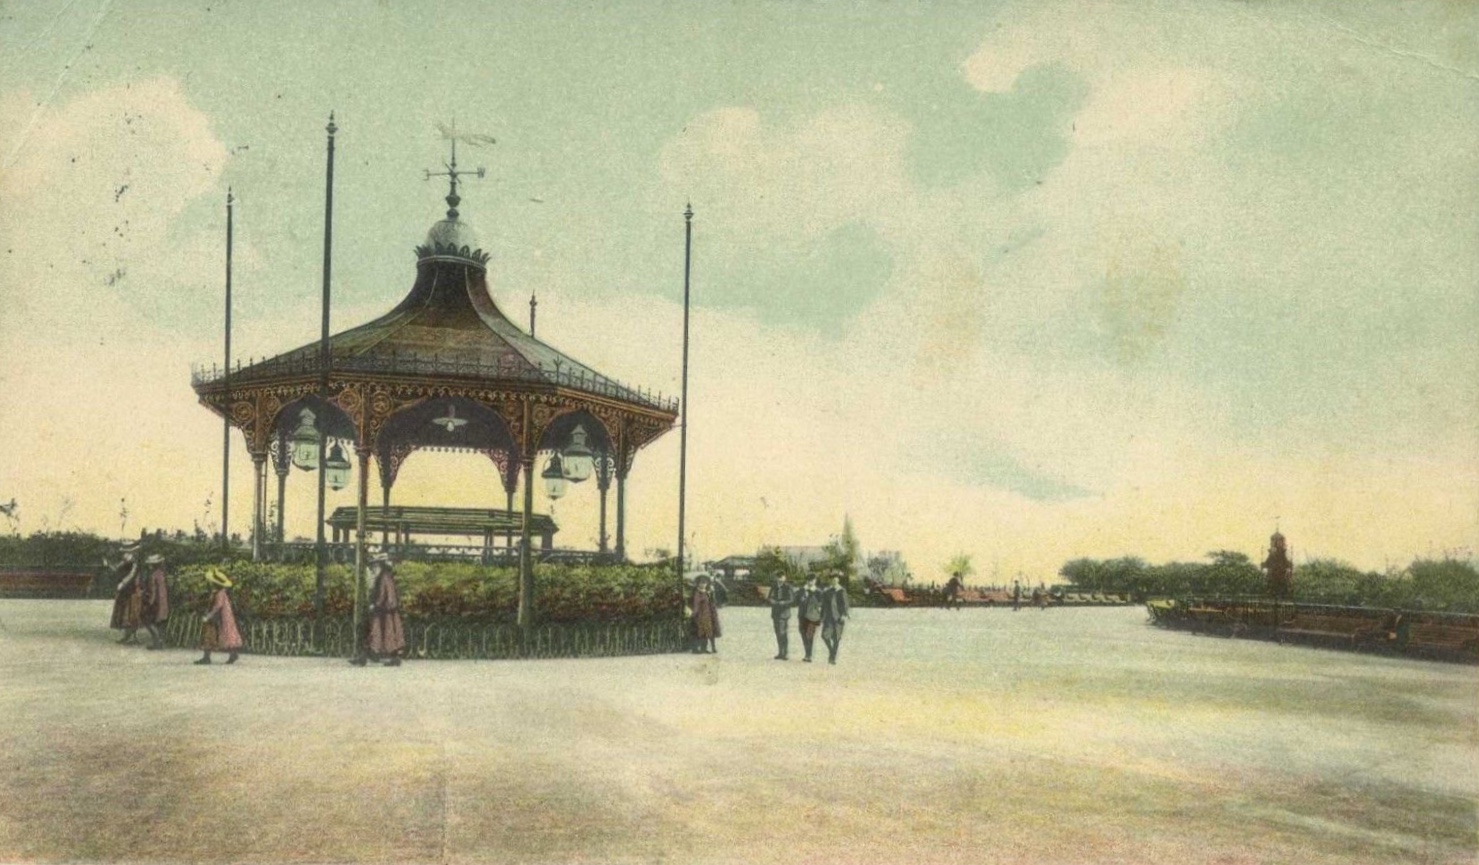 Bandstand, Woodhouse Moor, early 1900s